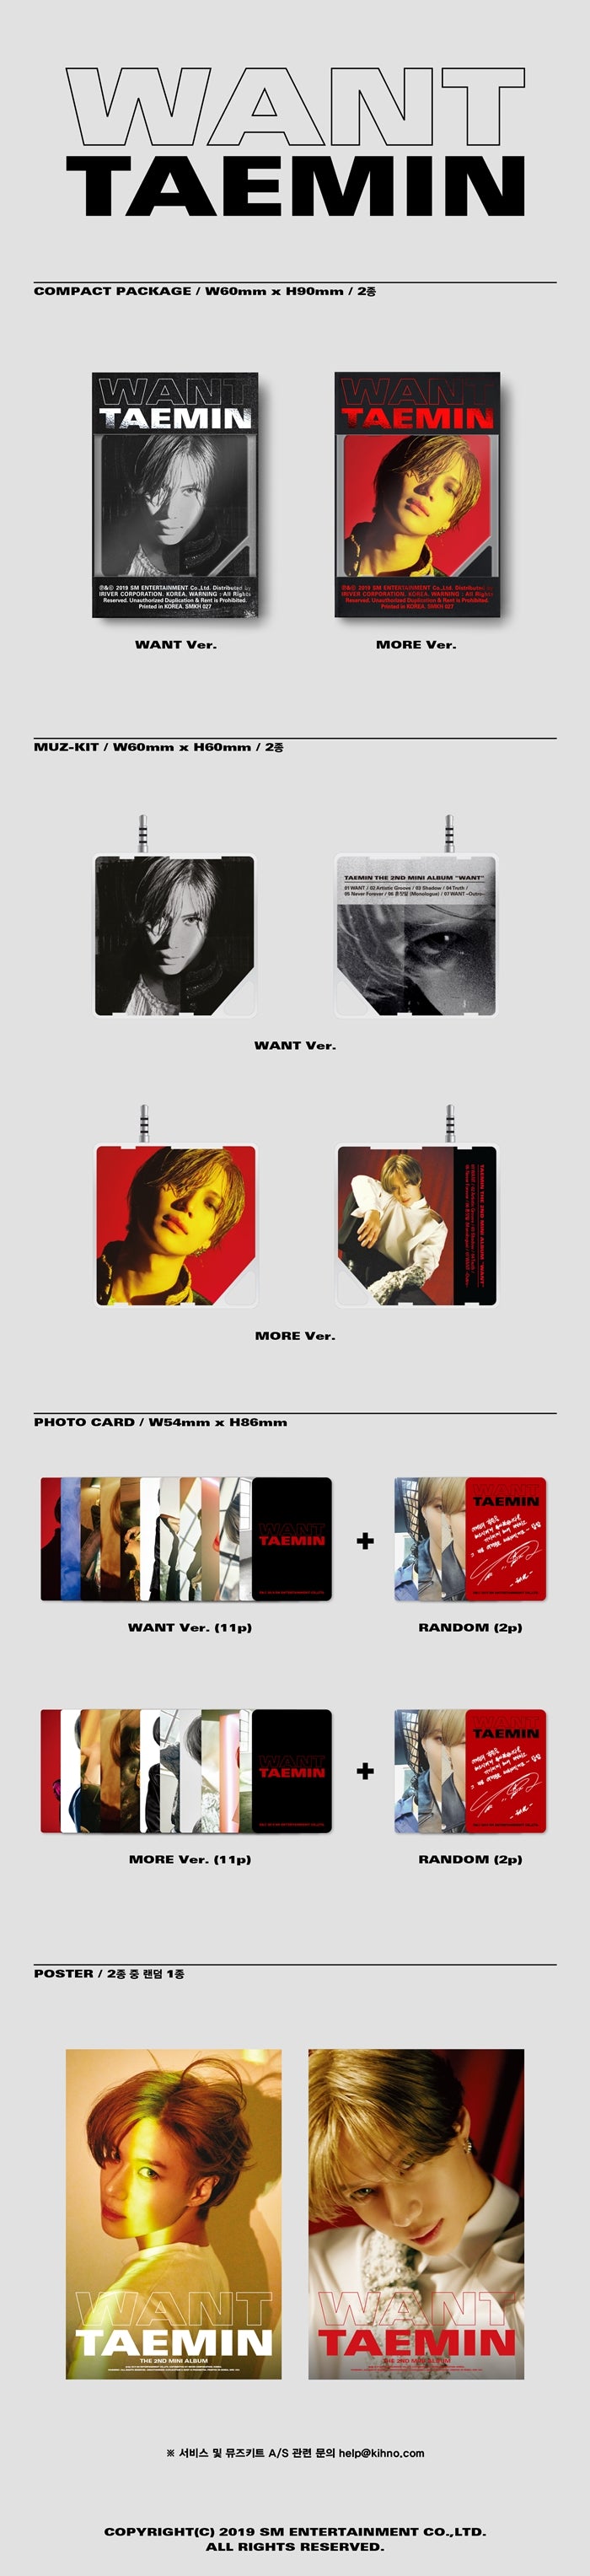 SHINee Taemin's 2nd mini album 'WANT' Released on February 11th! A total of 7 tracks including the title song 'WANT'! SHIN...